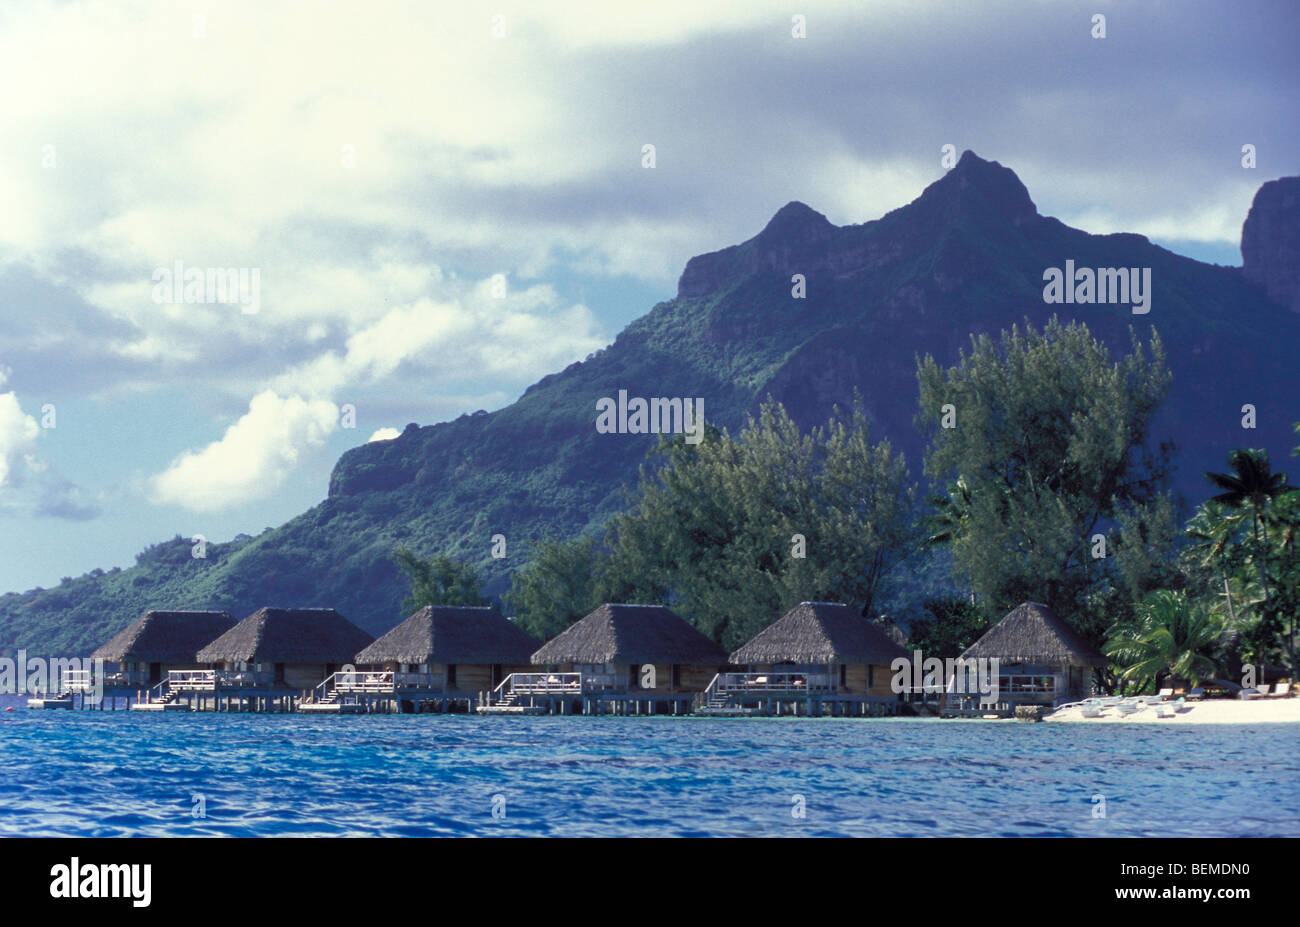 Small water bungalows at coast, in South Pacific. Bora Bora in background. French Polynesia. Stock Photo